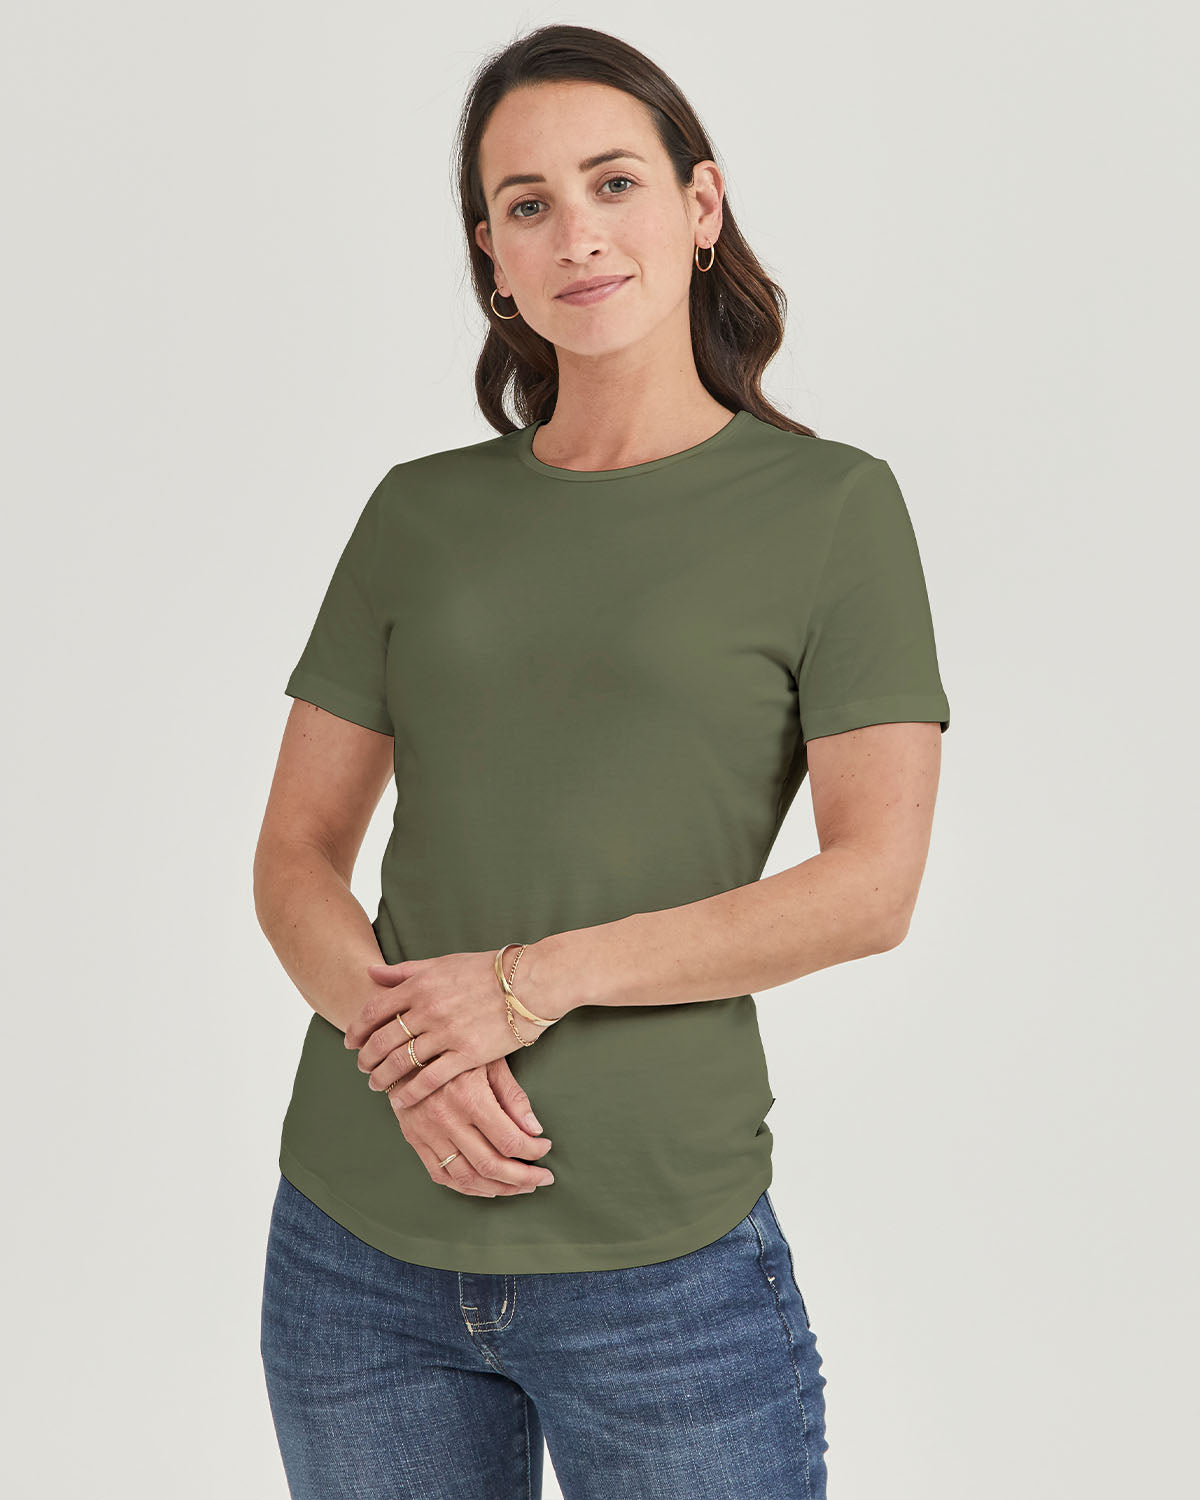 Womens Magic Fit Tees in Cactus Organic Cotton | Citizen Wolf